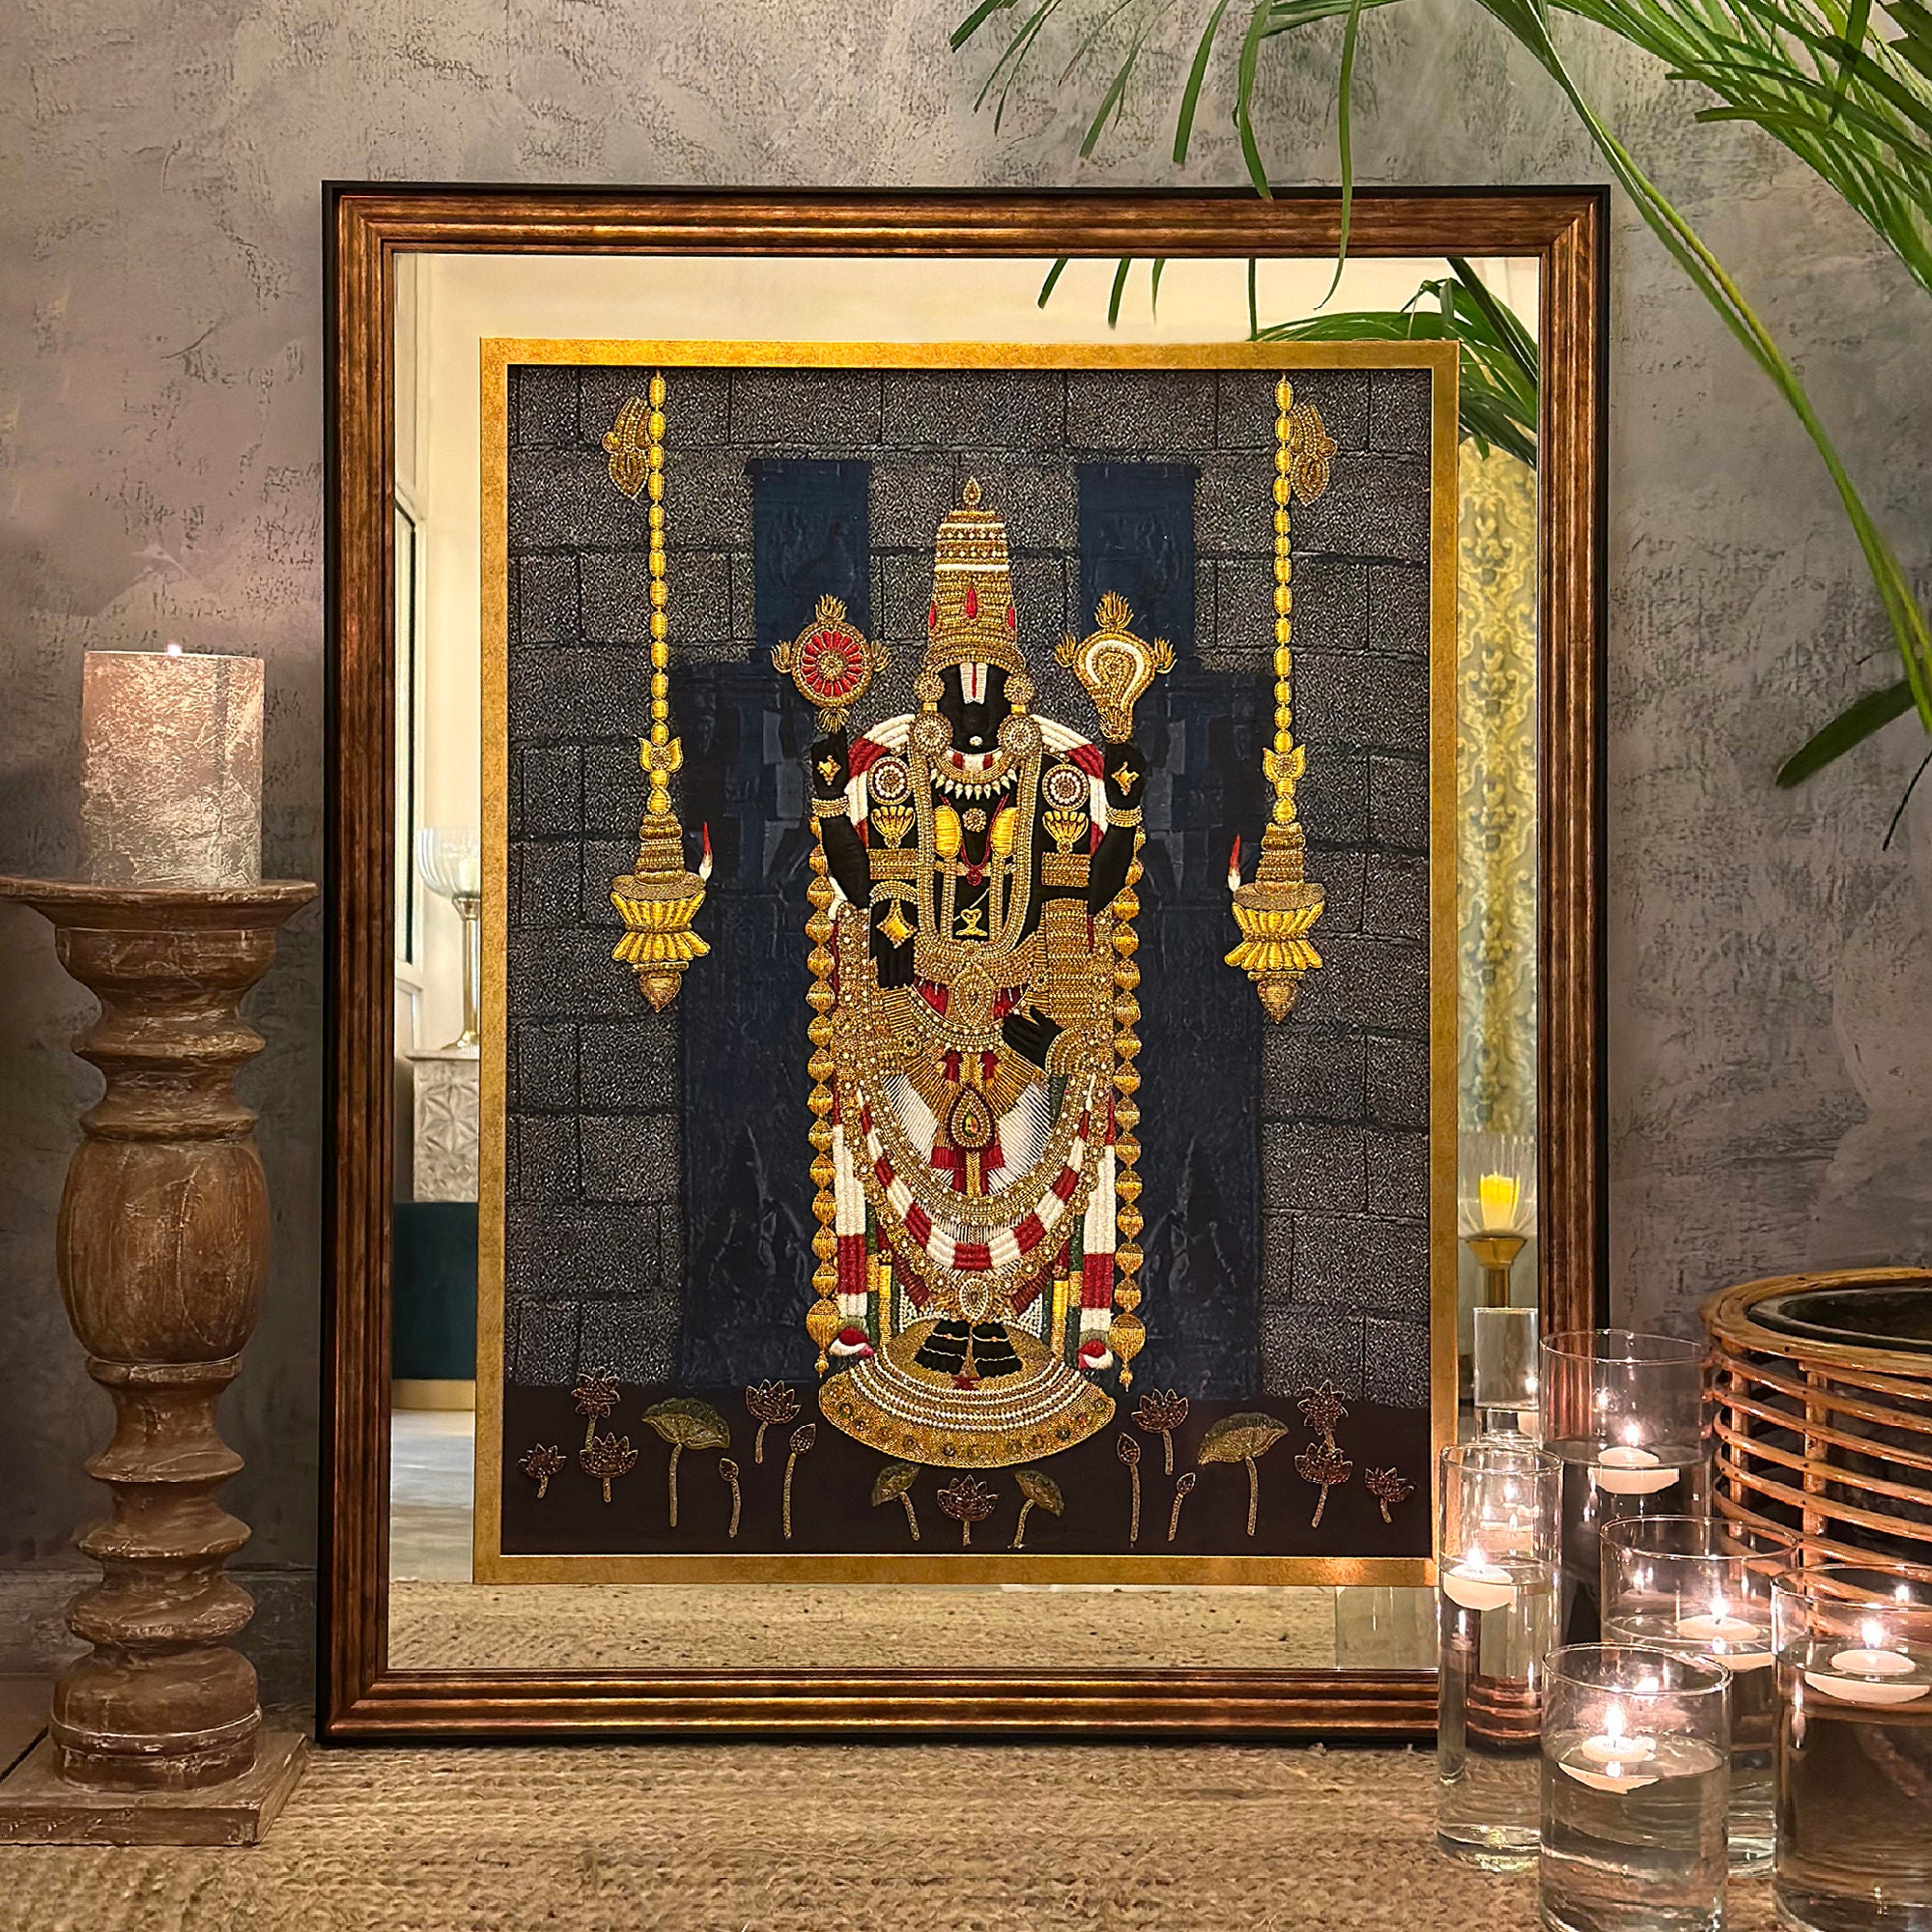 Lord Balaji Big Size Wall Artwork Handmade Embroidered Adult Picture